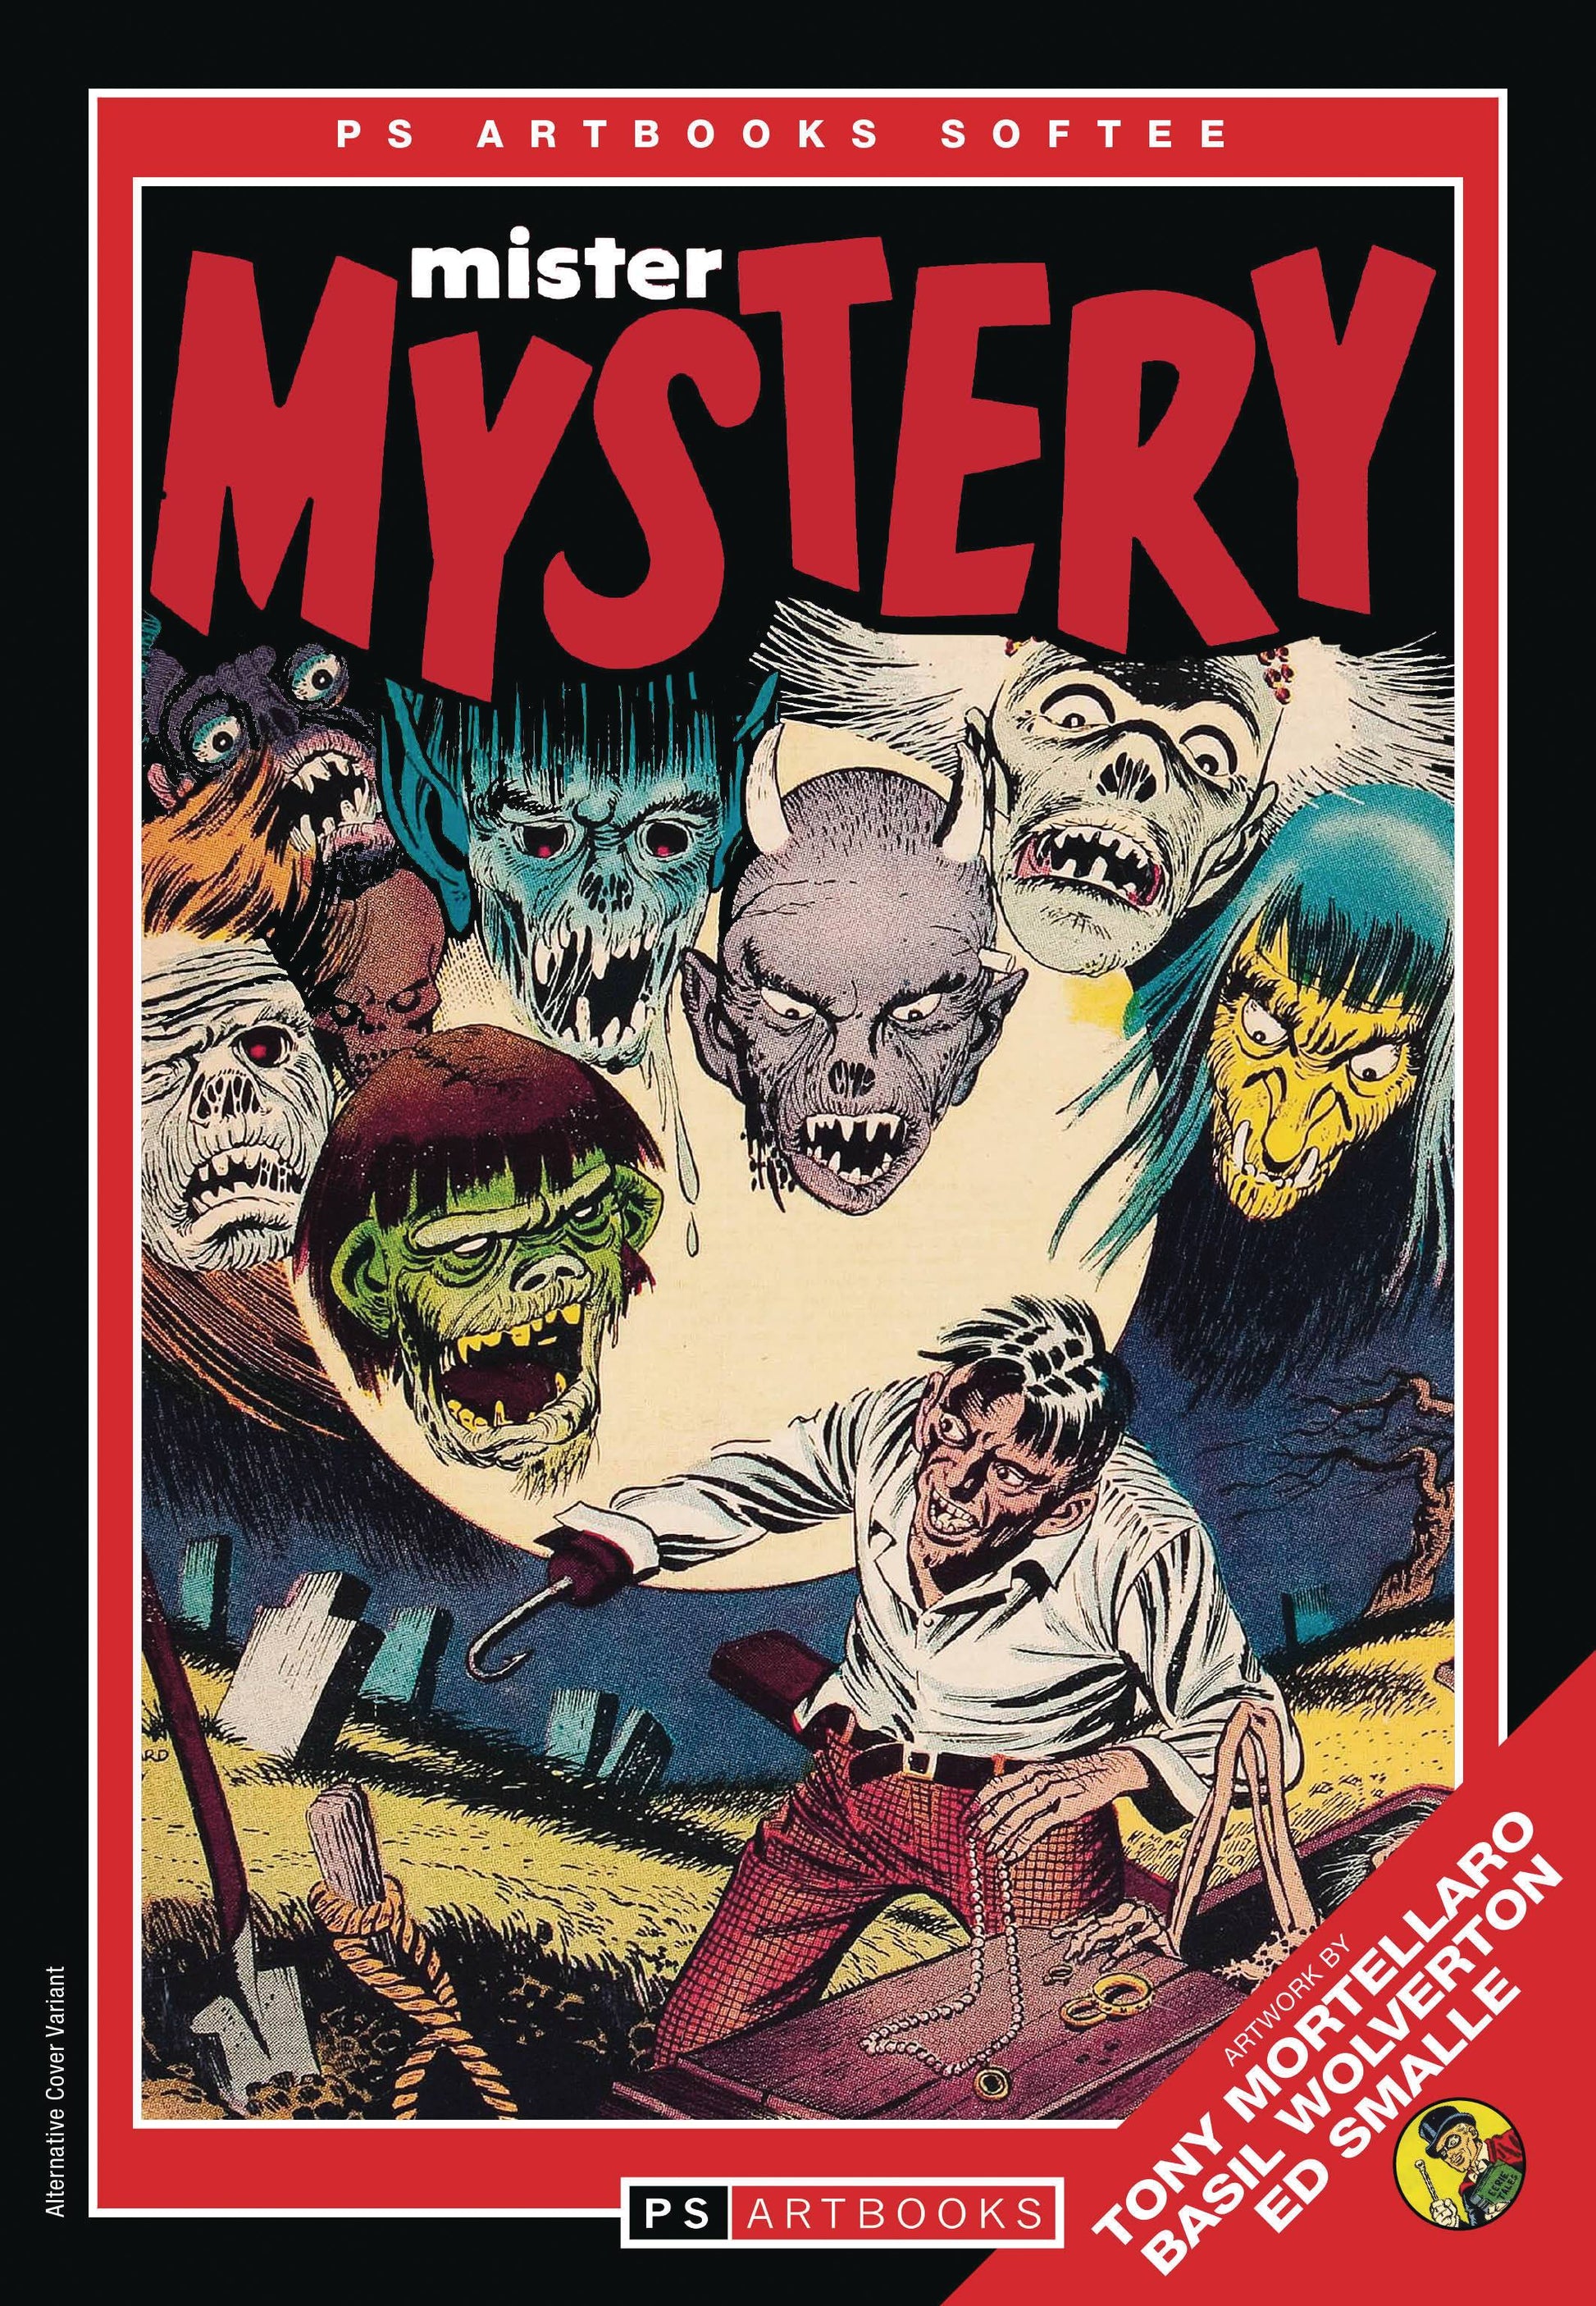 The One Stop Shop Comics & Games Pre Code Classics Mister Mystery Softee Vol 02 (C: 0-1-1) (3/29/2023) PS ARTBOOKS